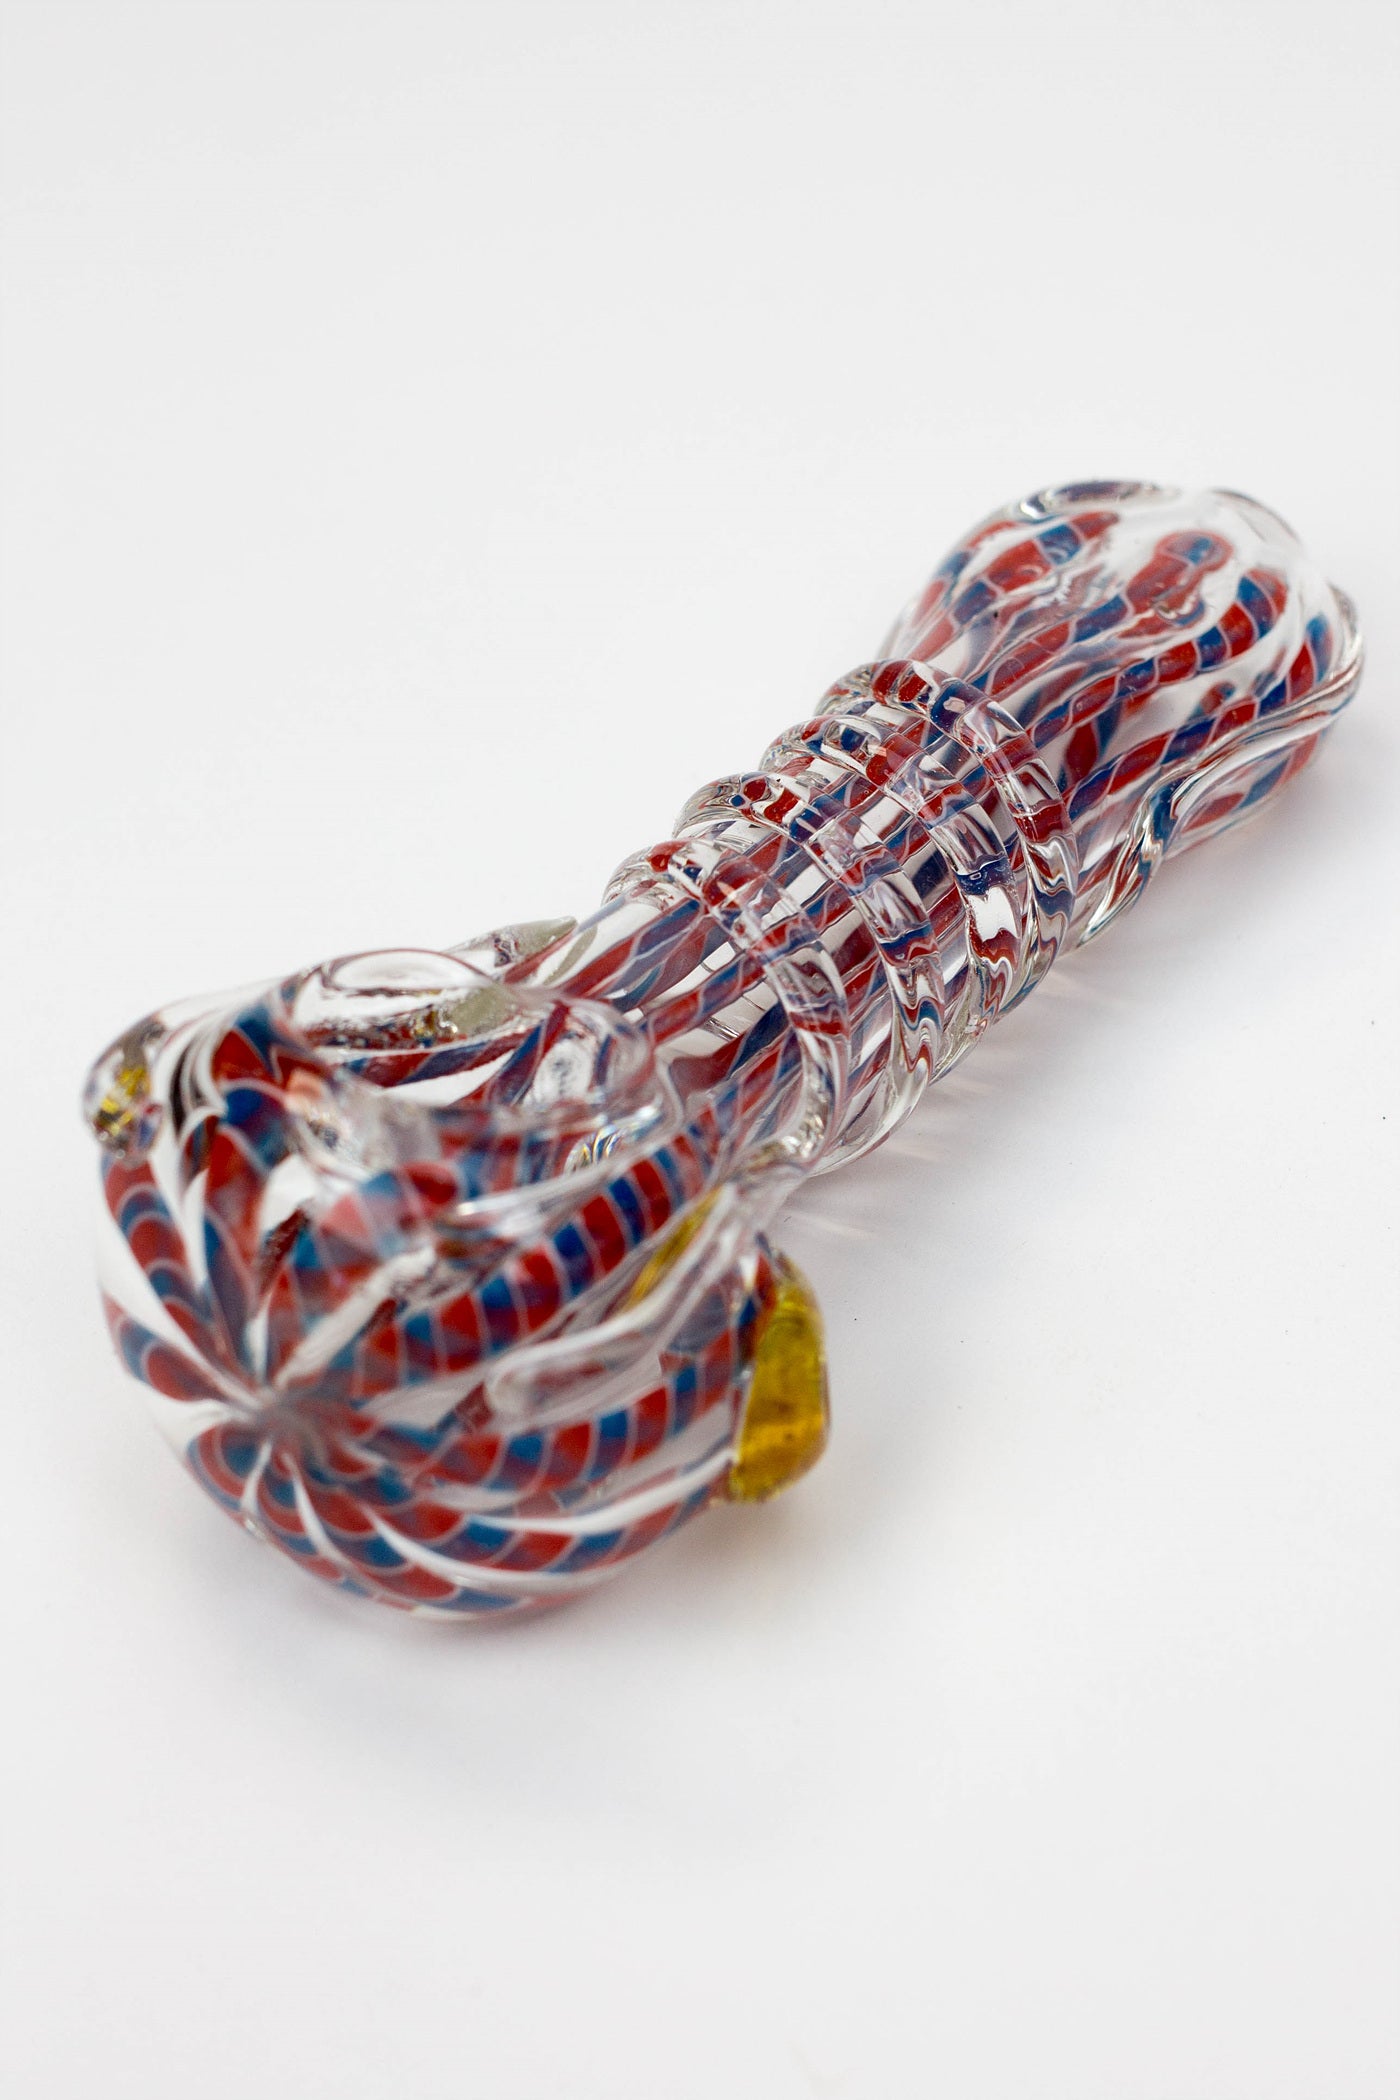 4.5" soft glass 8560 hand pipe - 127_1